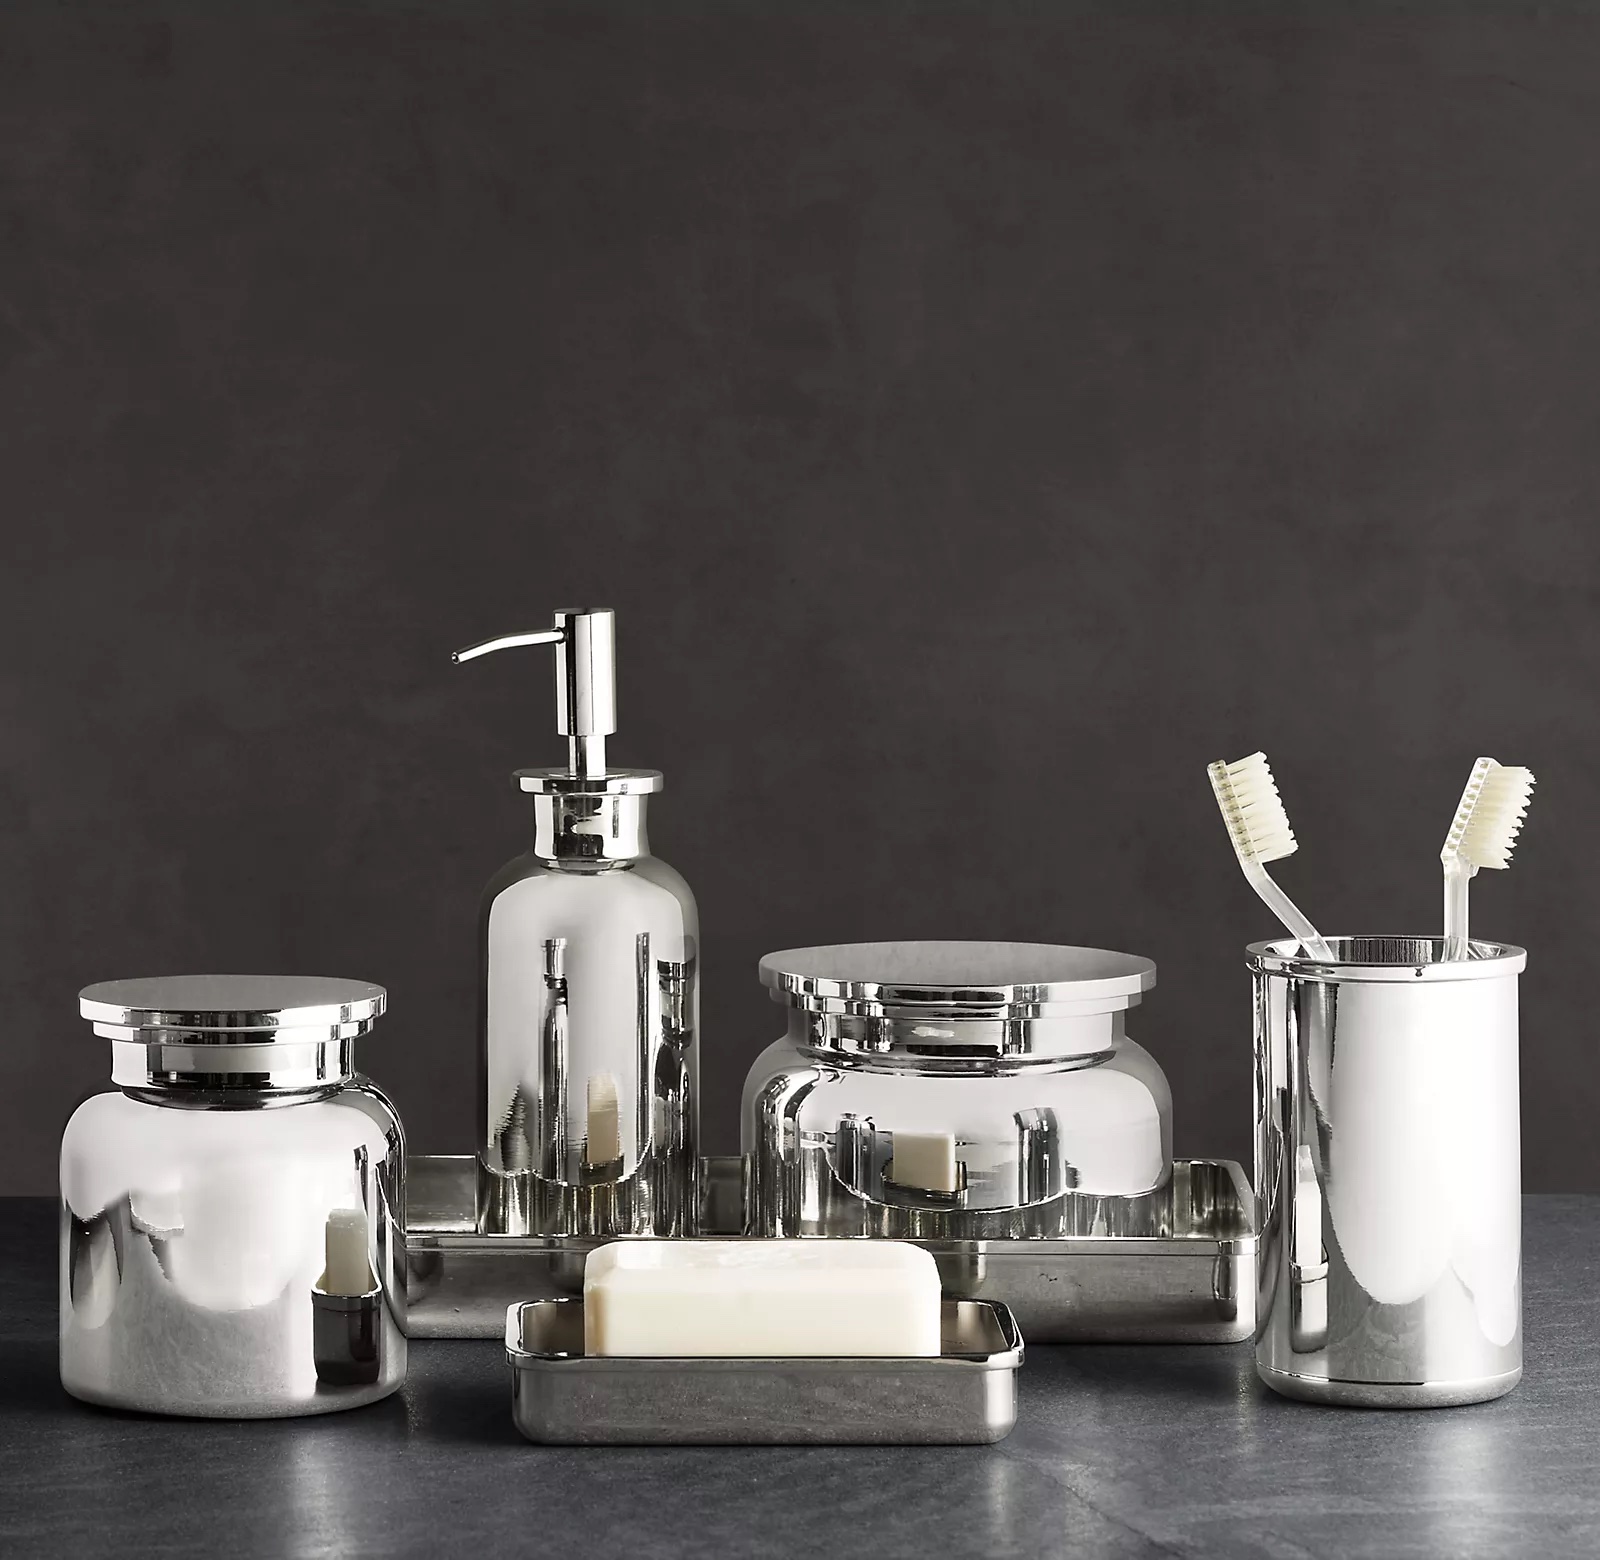 Restoration Hardware’s Pharmacy Metal Bath Accessories line adds a classic apothecary feeling to the bathroom. The soap dish contains a ribbed well to keep soap dry. Available in 5 finishes, including polished chrome; $70.